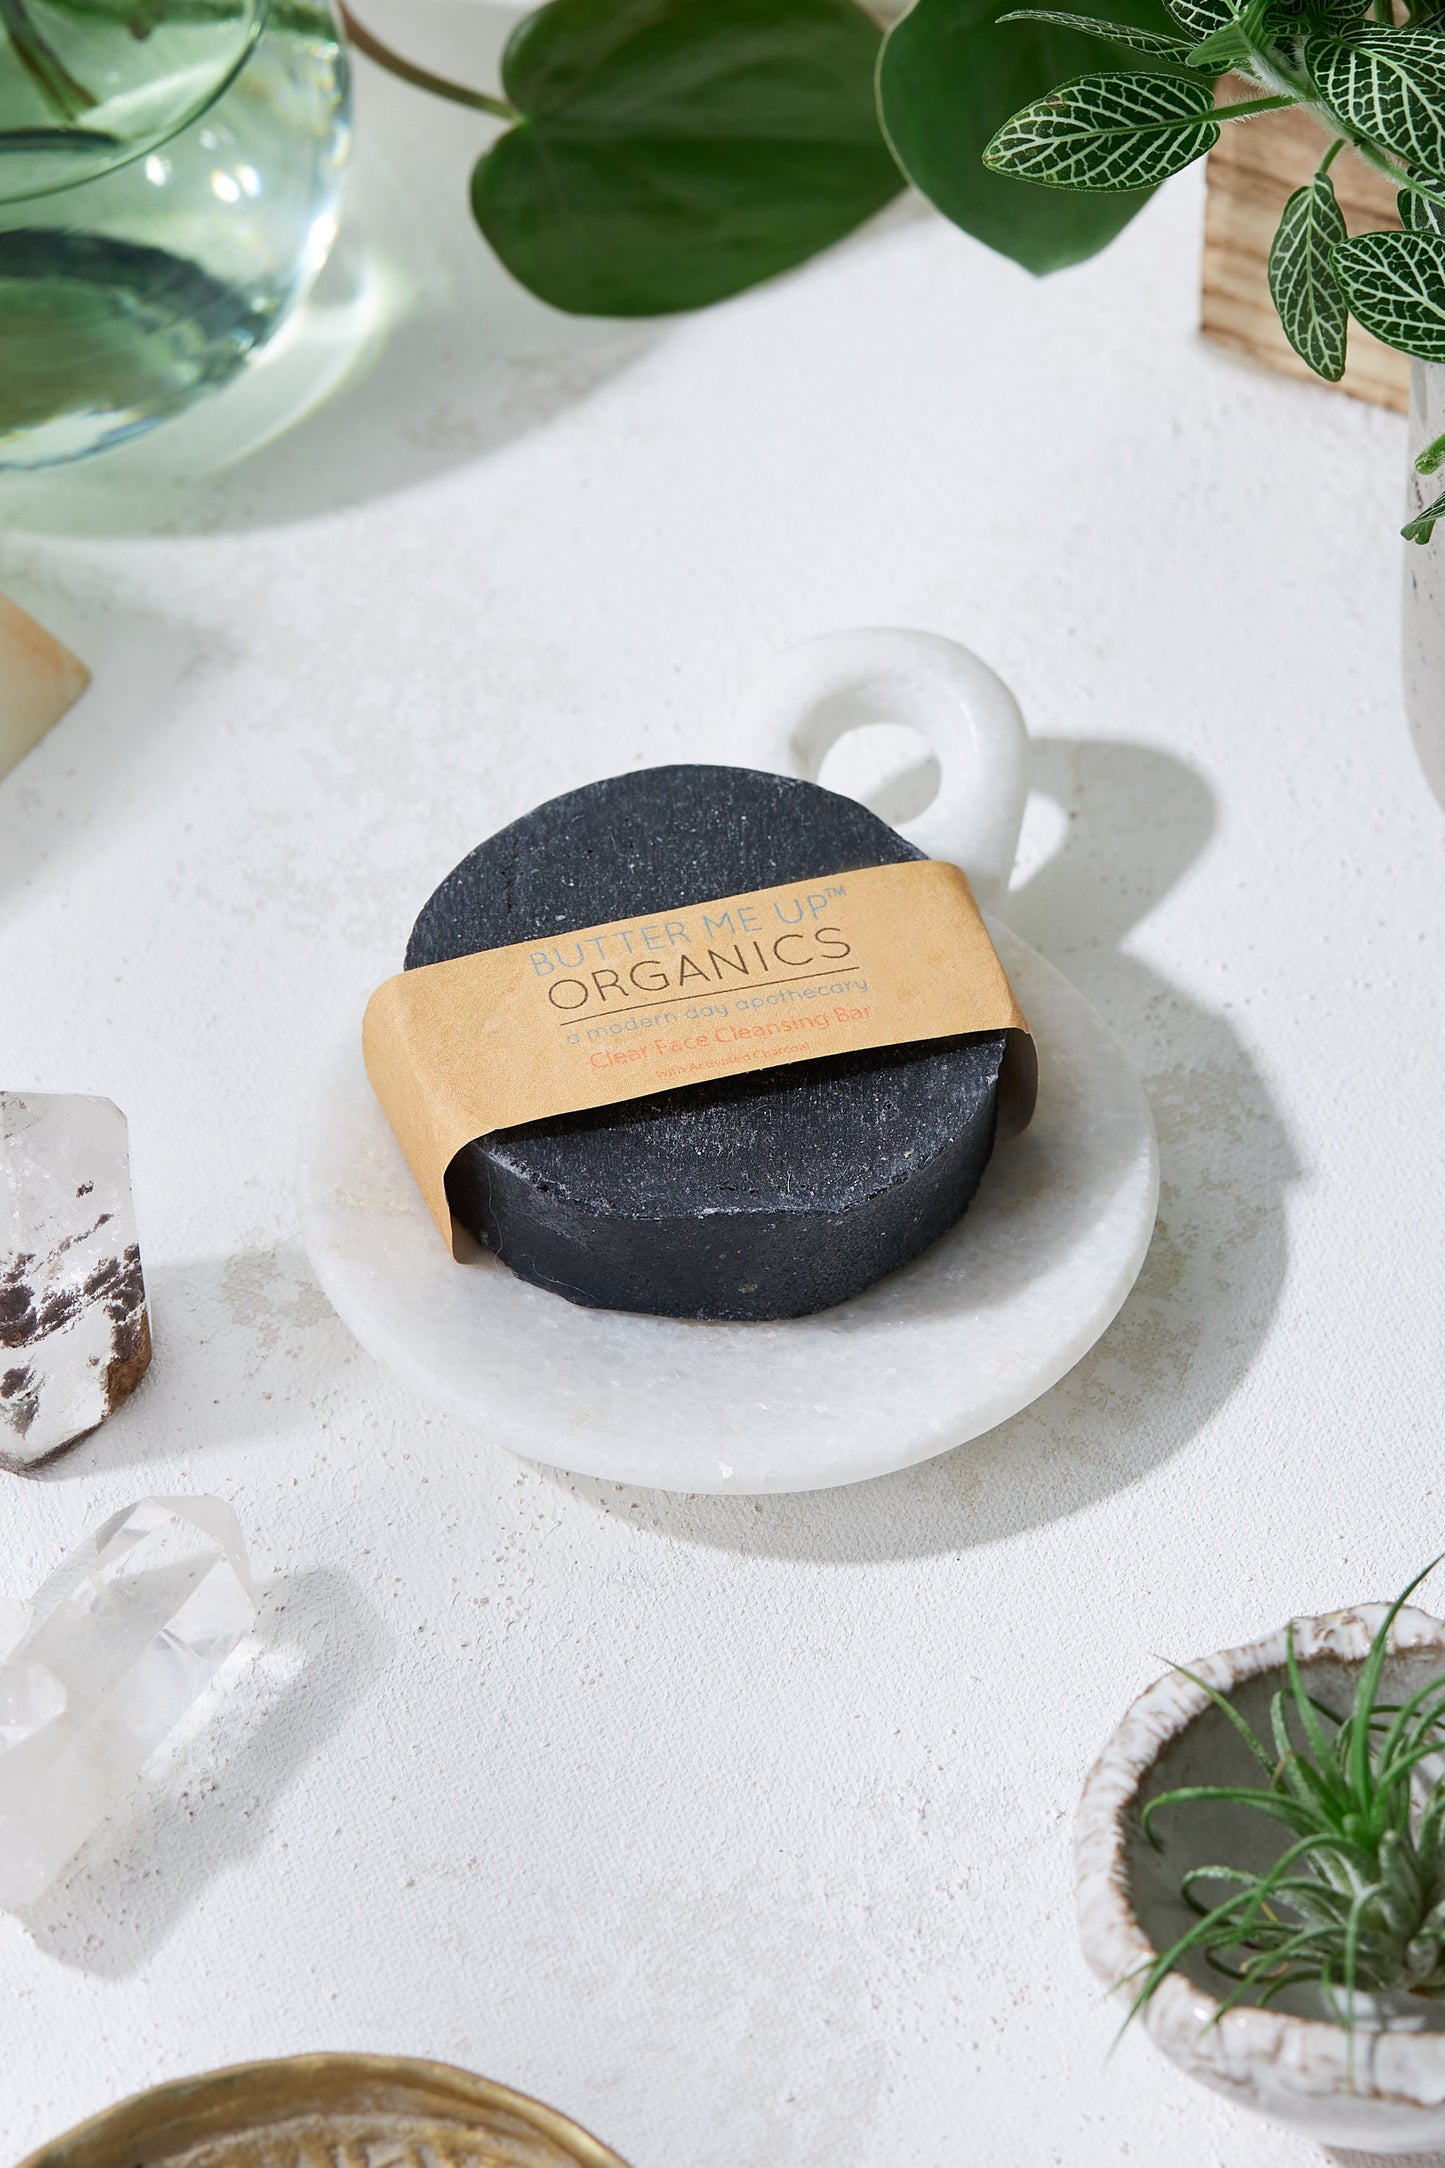 BUTTER ME UP ORGANICS Activated Charcoal Face Soap